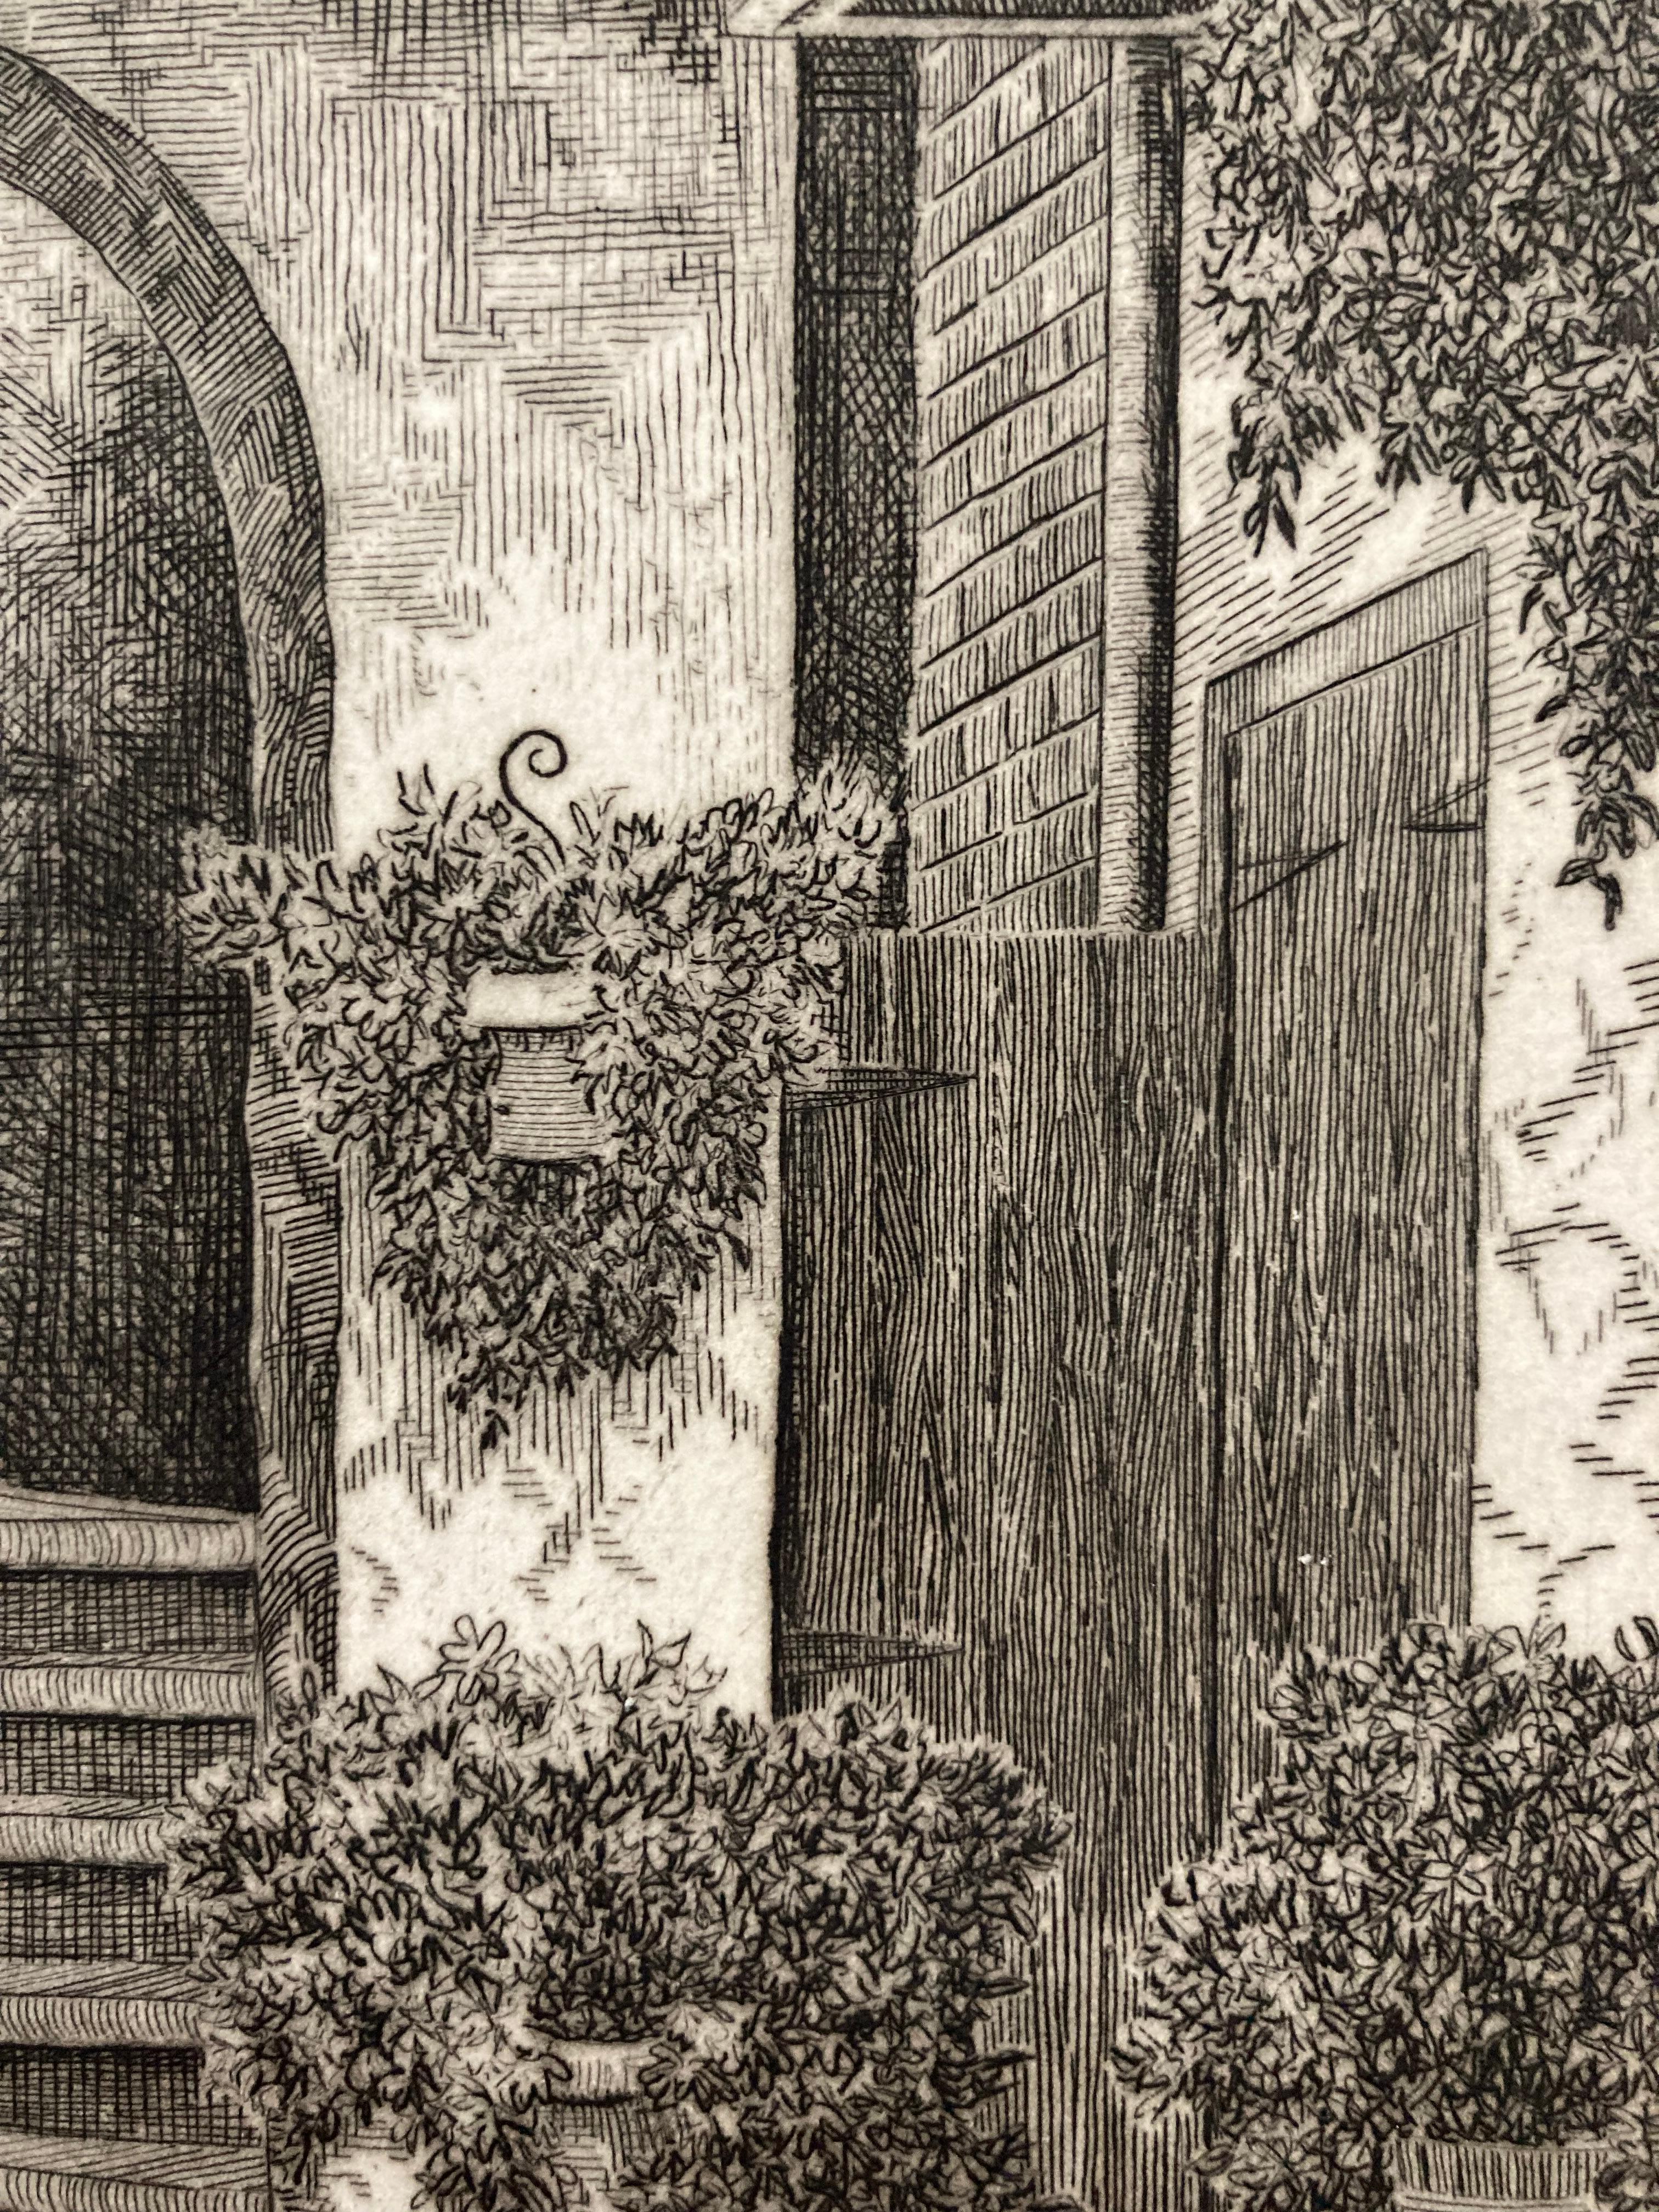 A signed etching by the justifiably famous New Orleans French Quarter artist Eugene Loving, in an edition of 200. It depicts in wonderful detail one of the notable courtyards of the French Quarter, the Marchand Courtyard.  Loving was born in Texas,